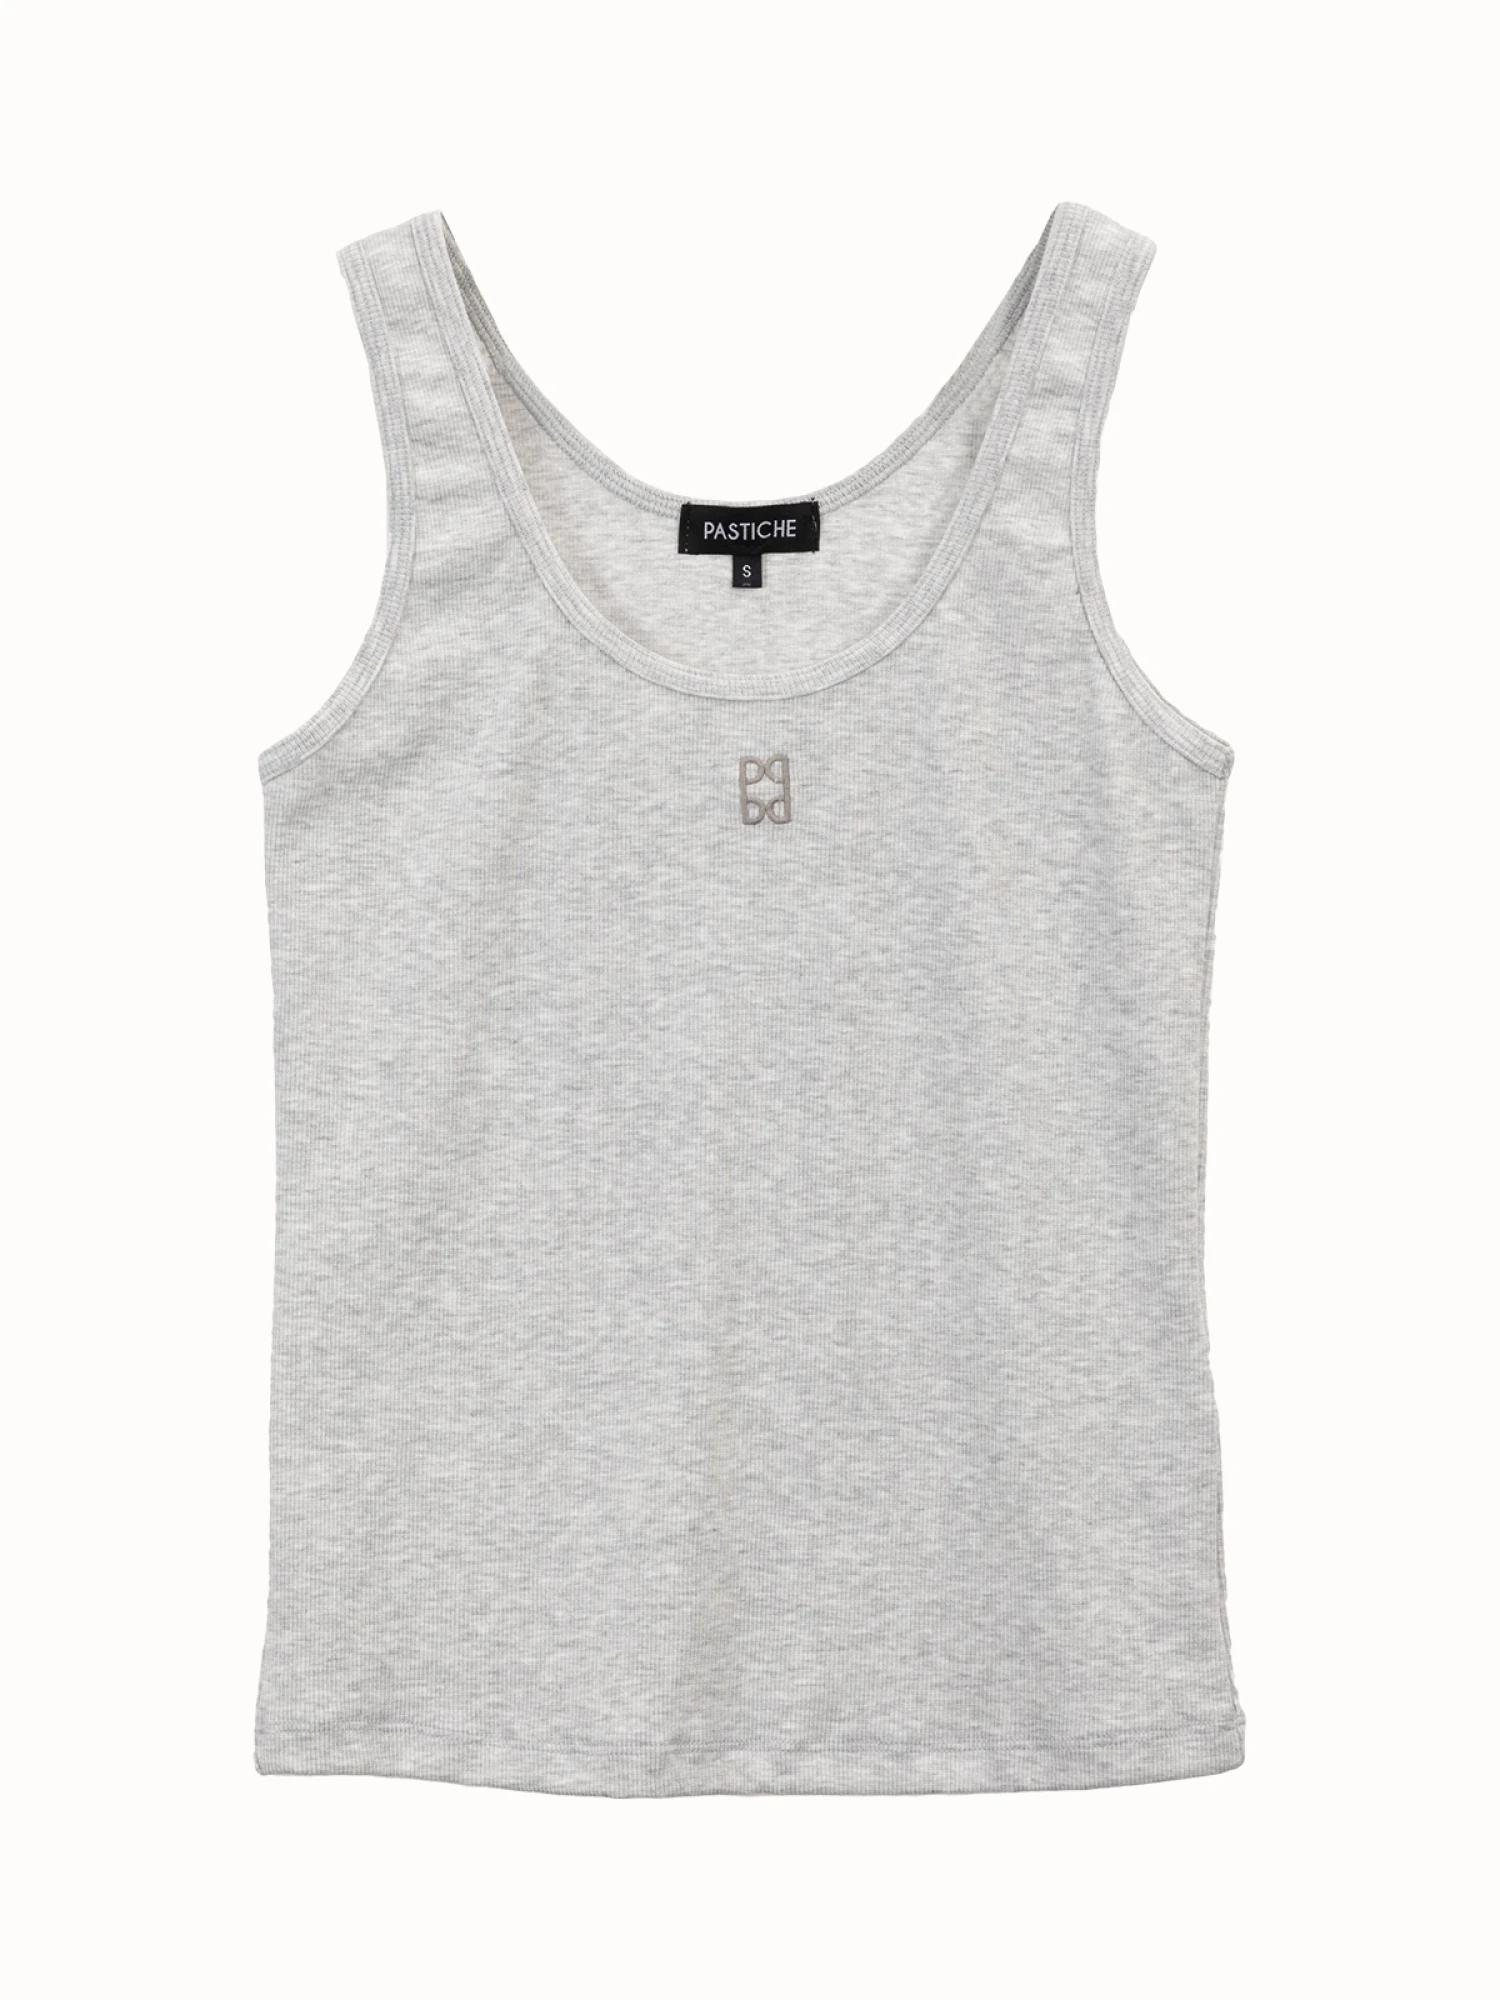 Musculosa Candy gris melange s